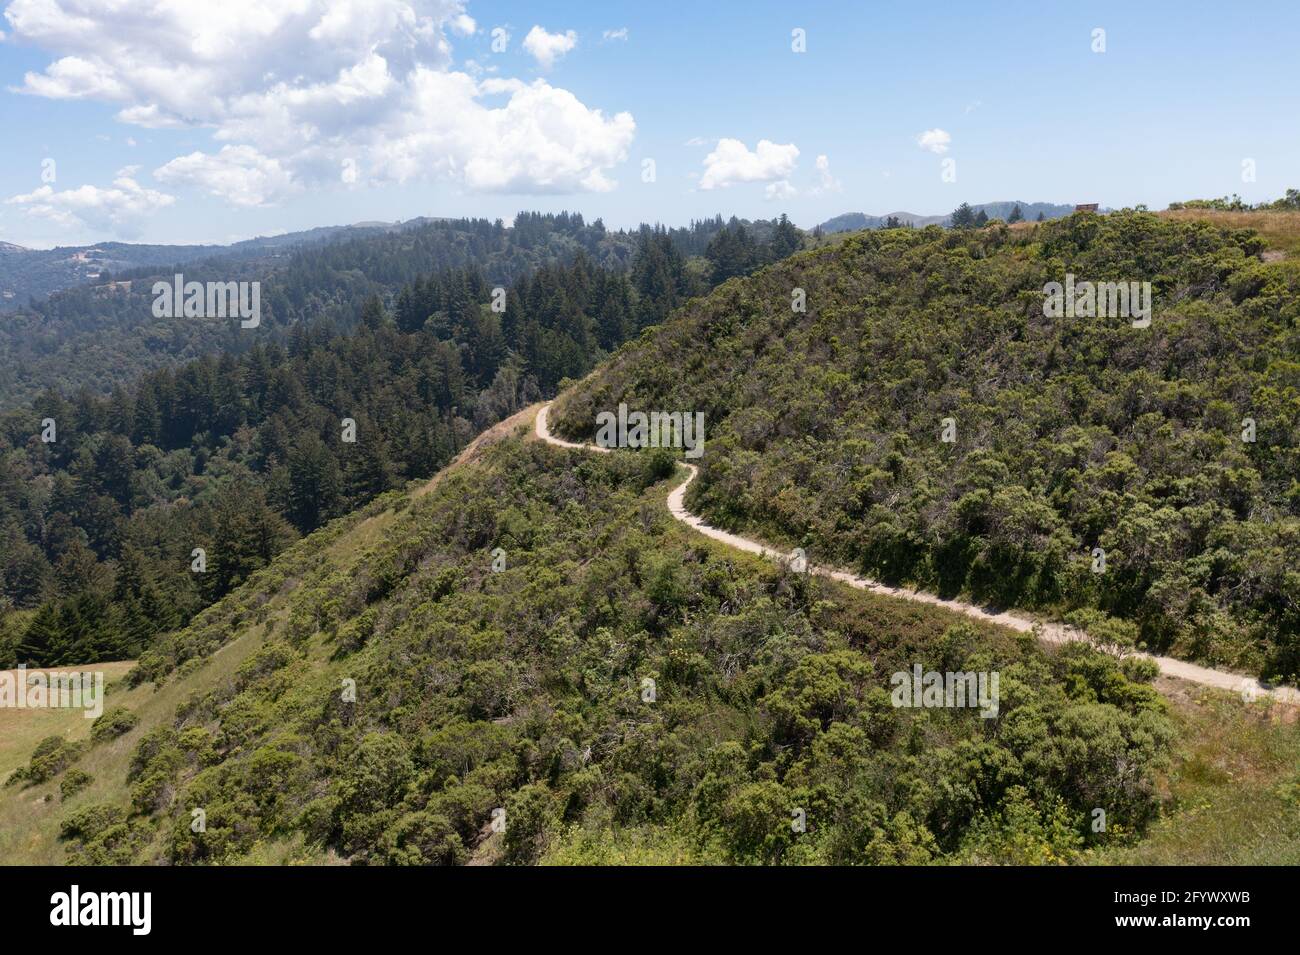 Scenic trails meander through the vegetation-covered hills of the East Bay, just a few miles from San Francisco Bay in Northern California. Stock Photo